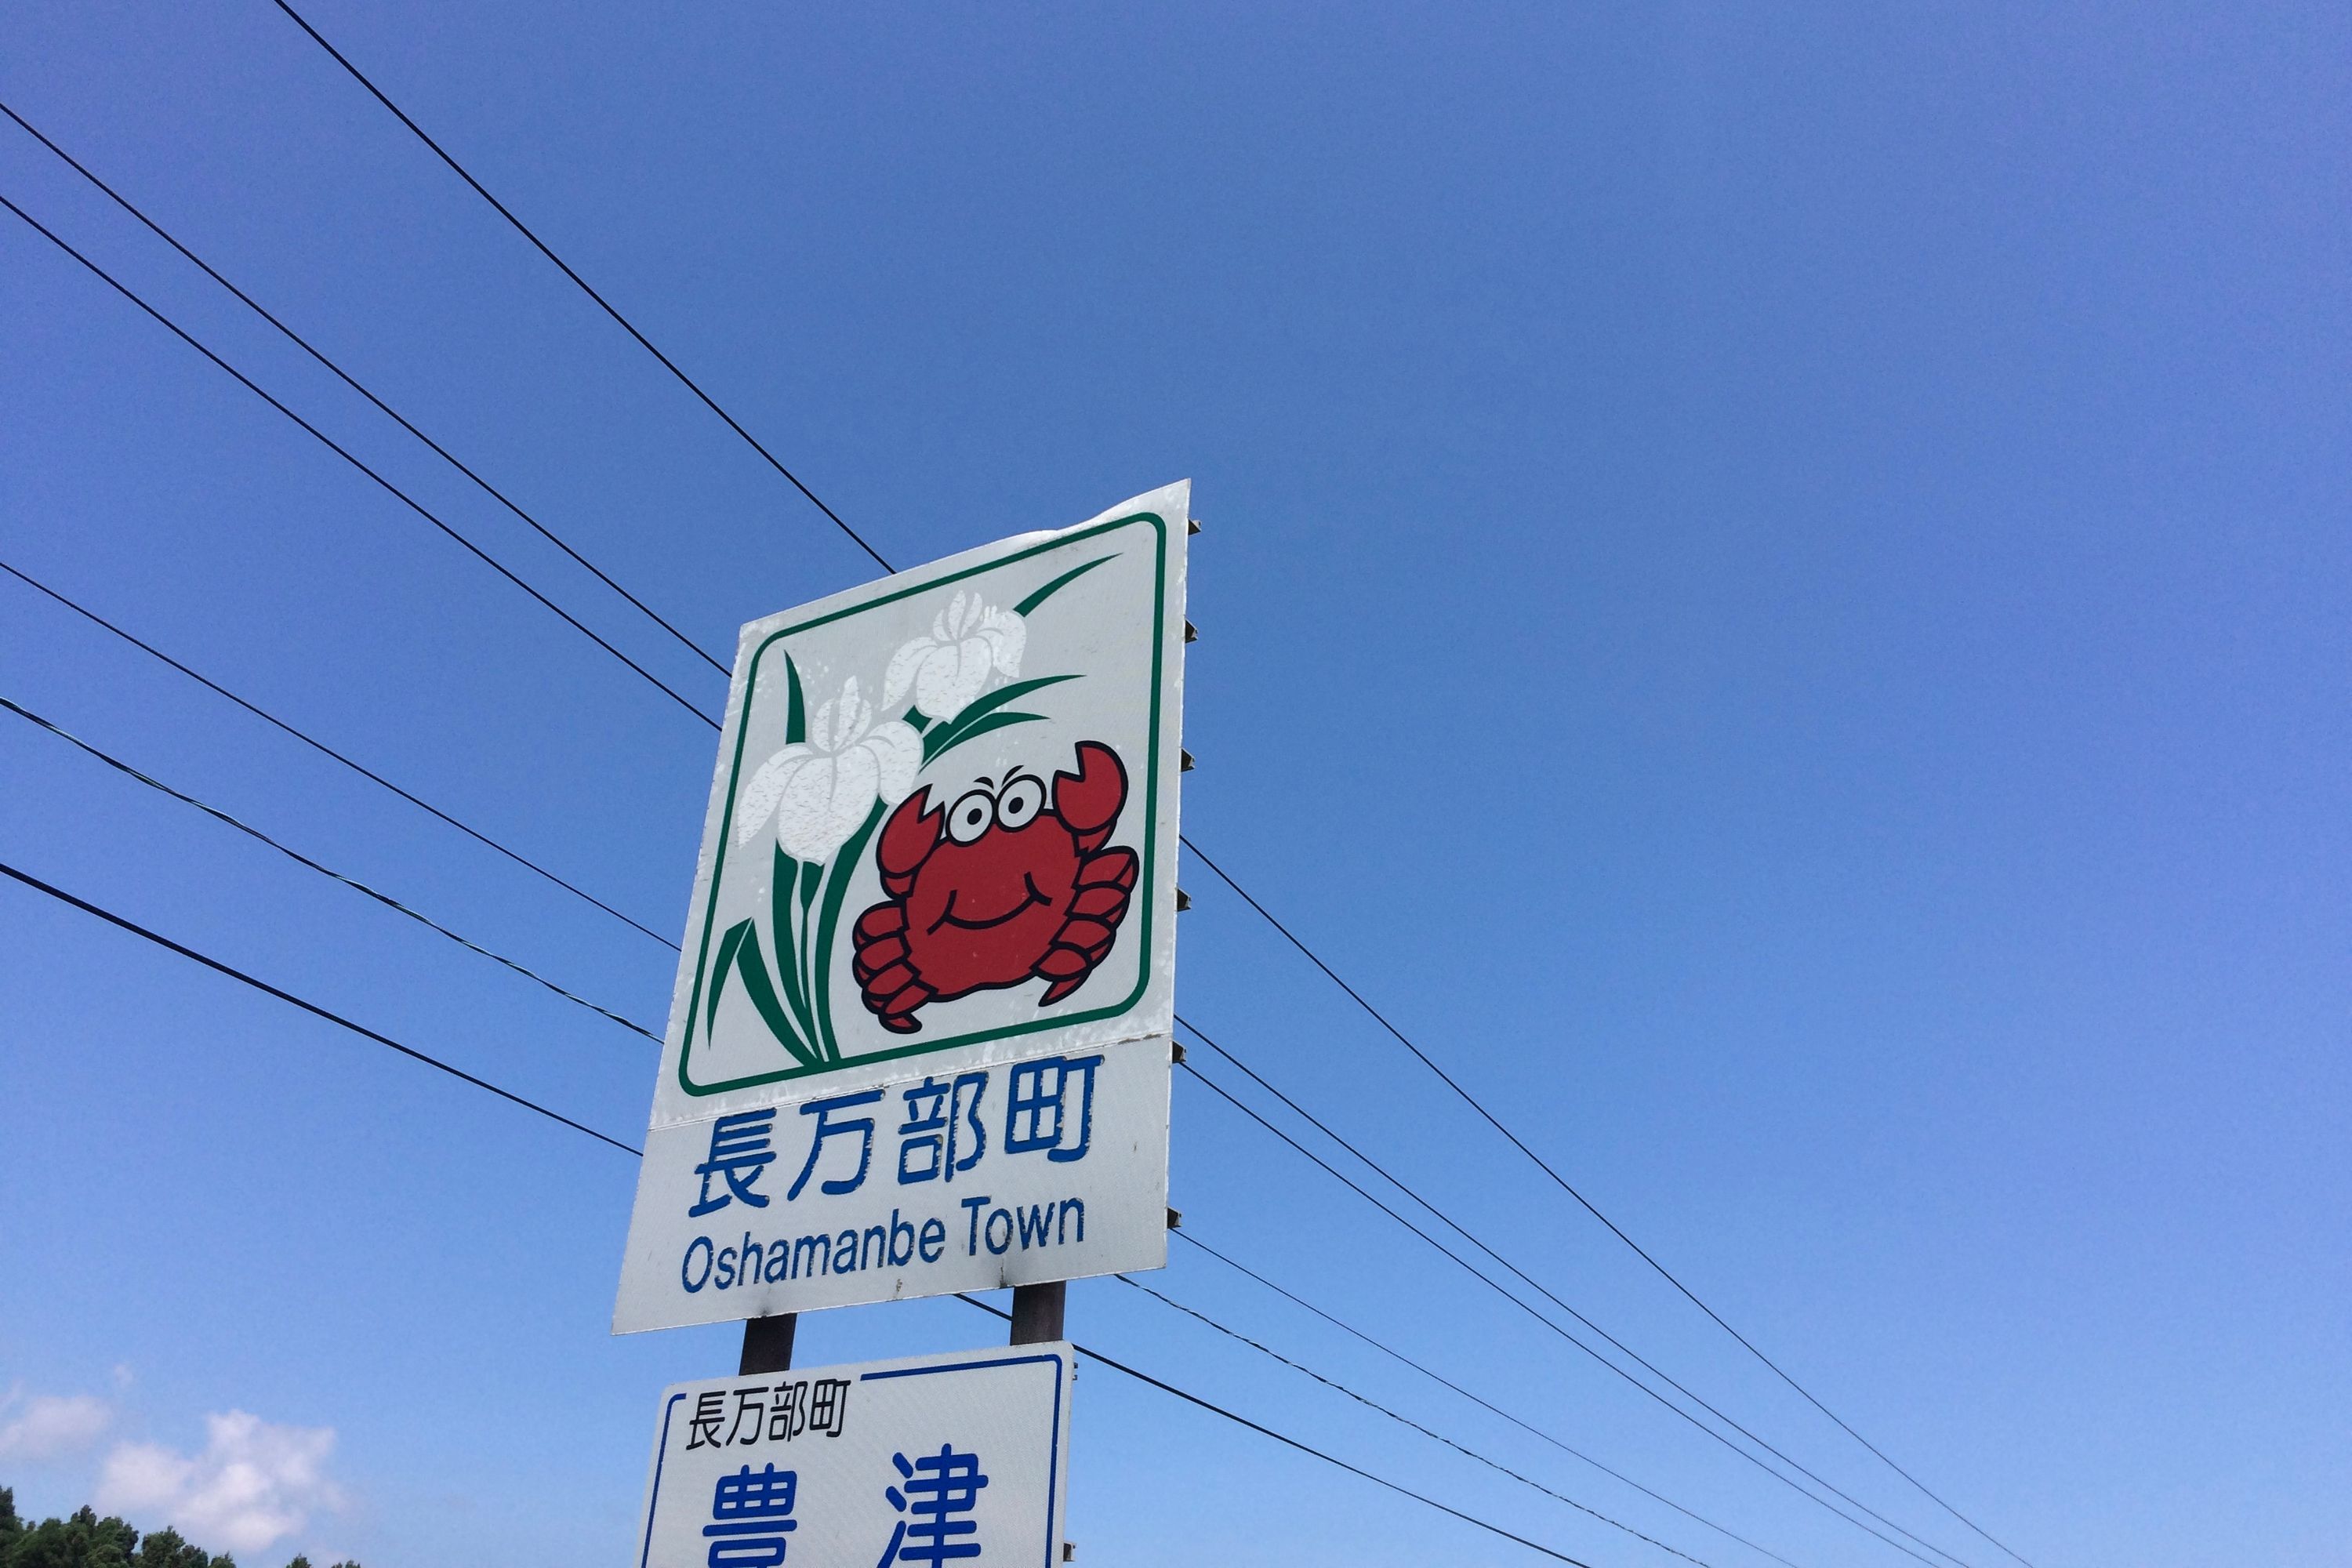 The same crab, the emblem of Oshamambe Town, on a sign.